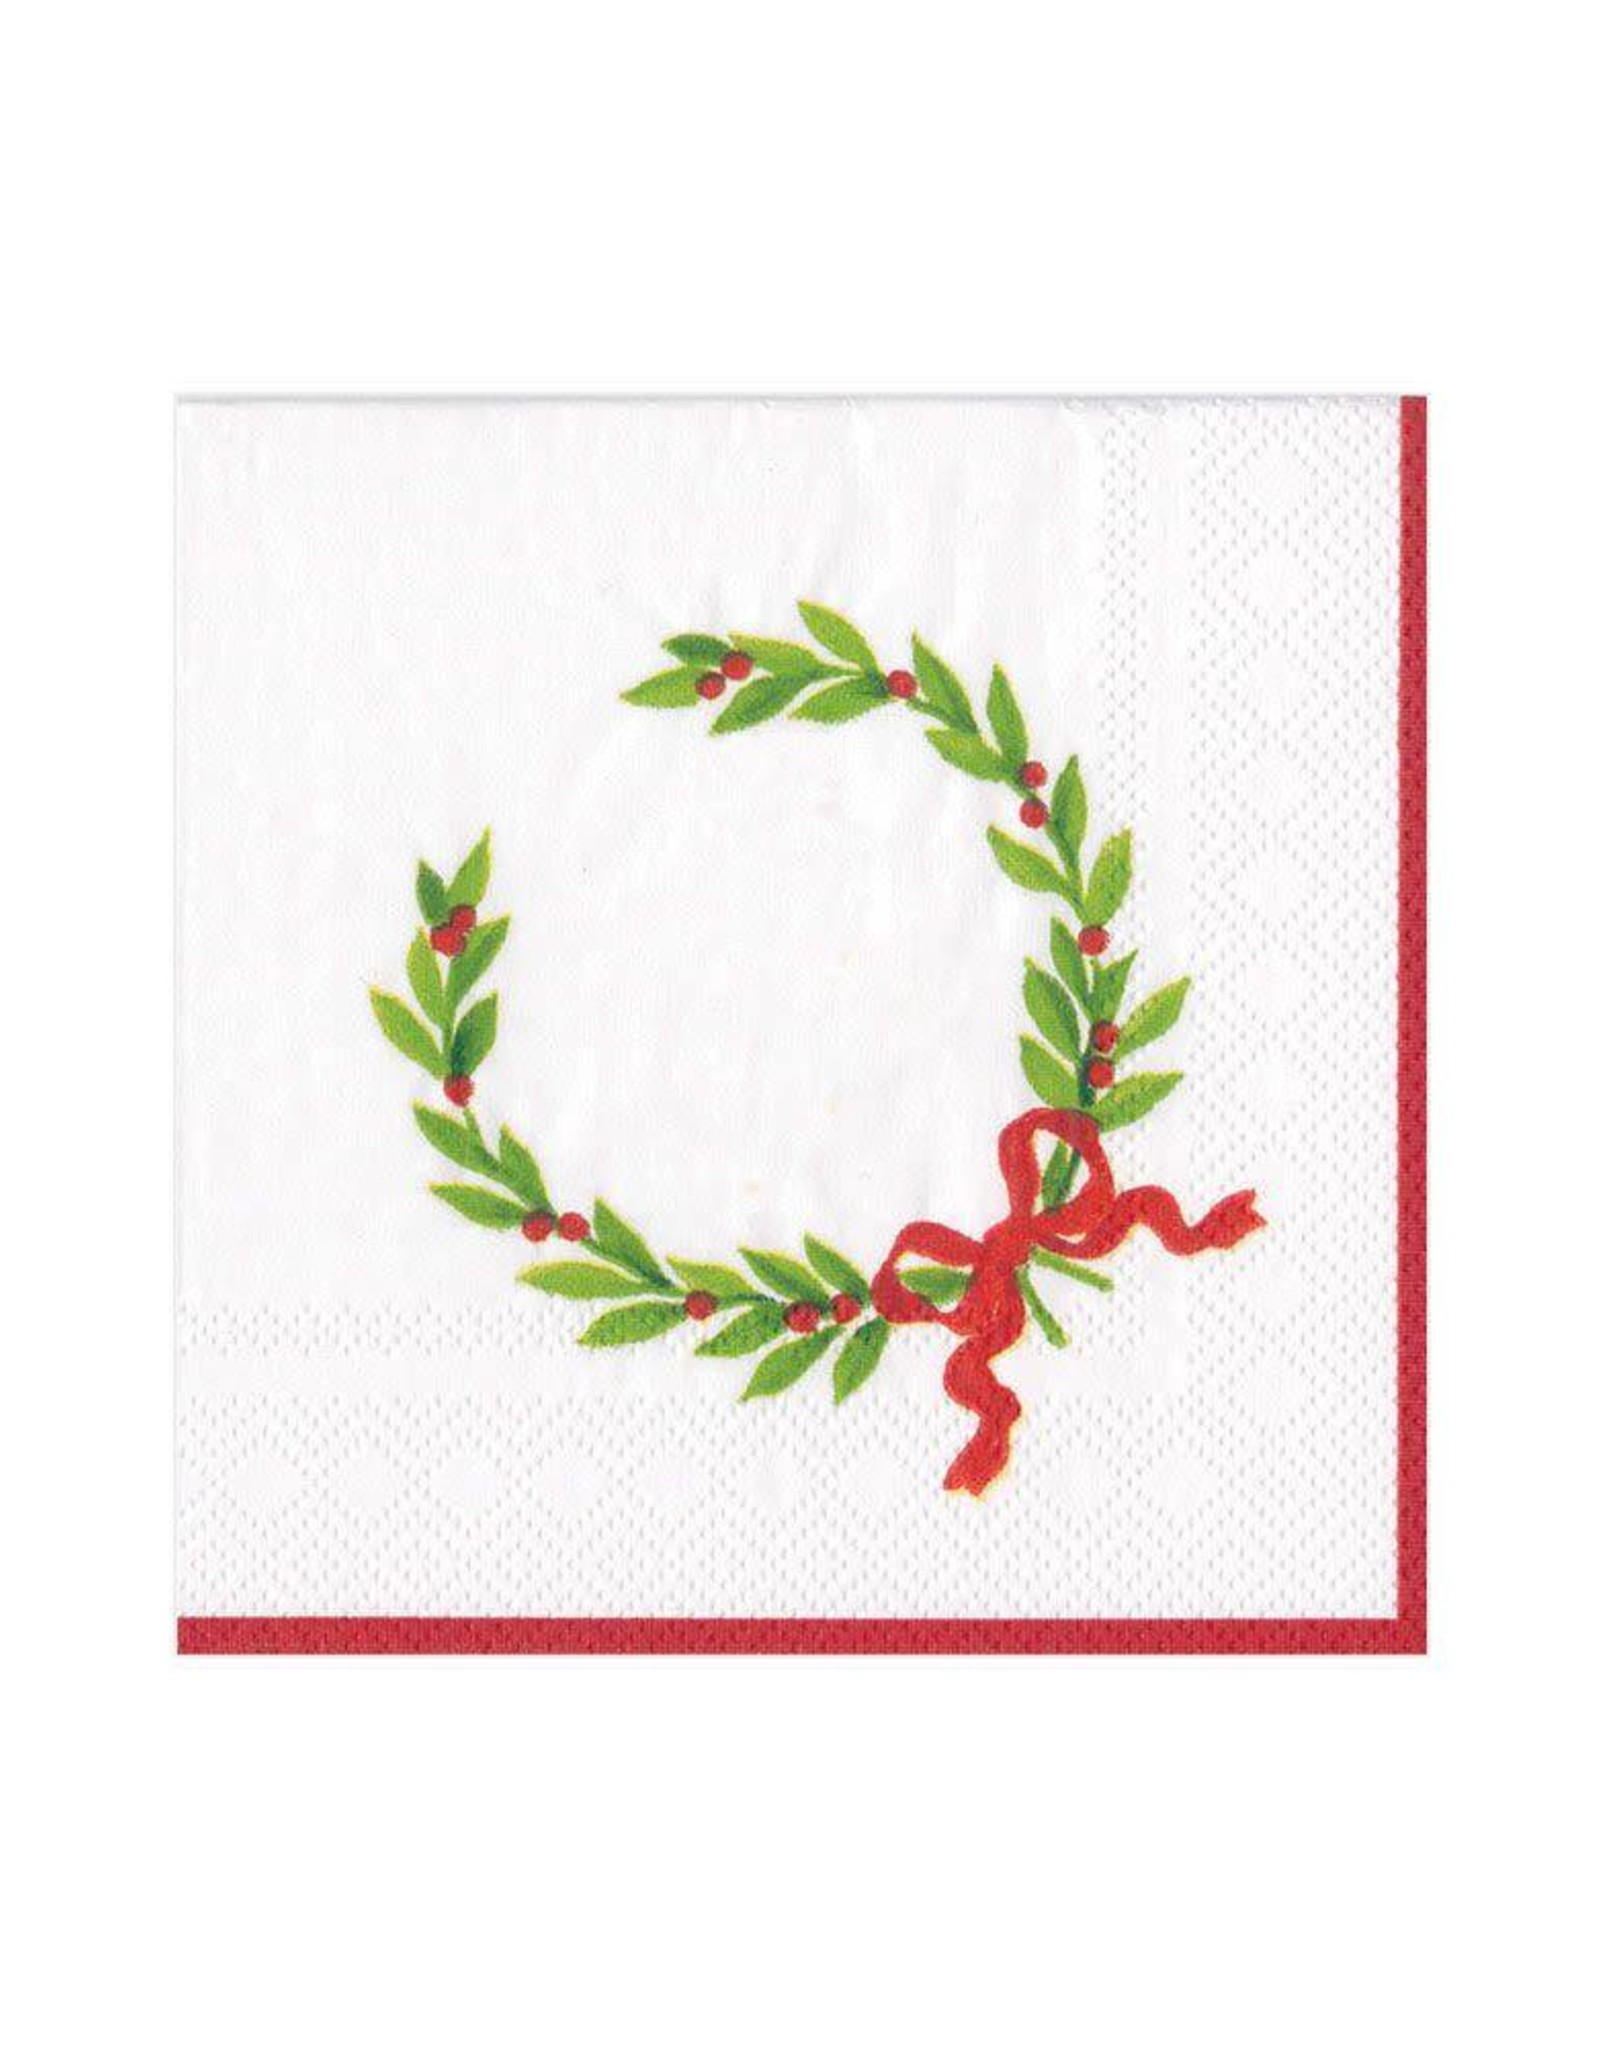 Christmas Laurel Wreath with Initial "S" Beverage Napkin (20ct)